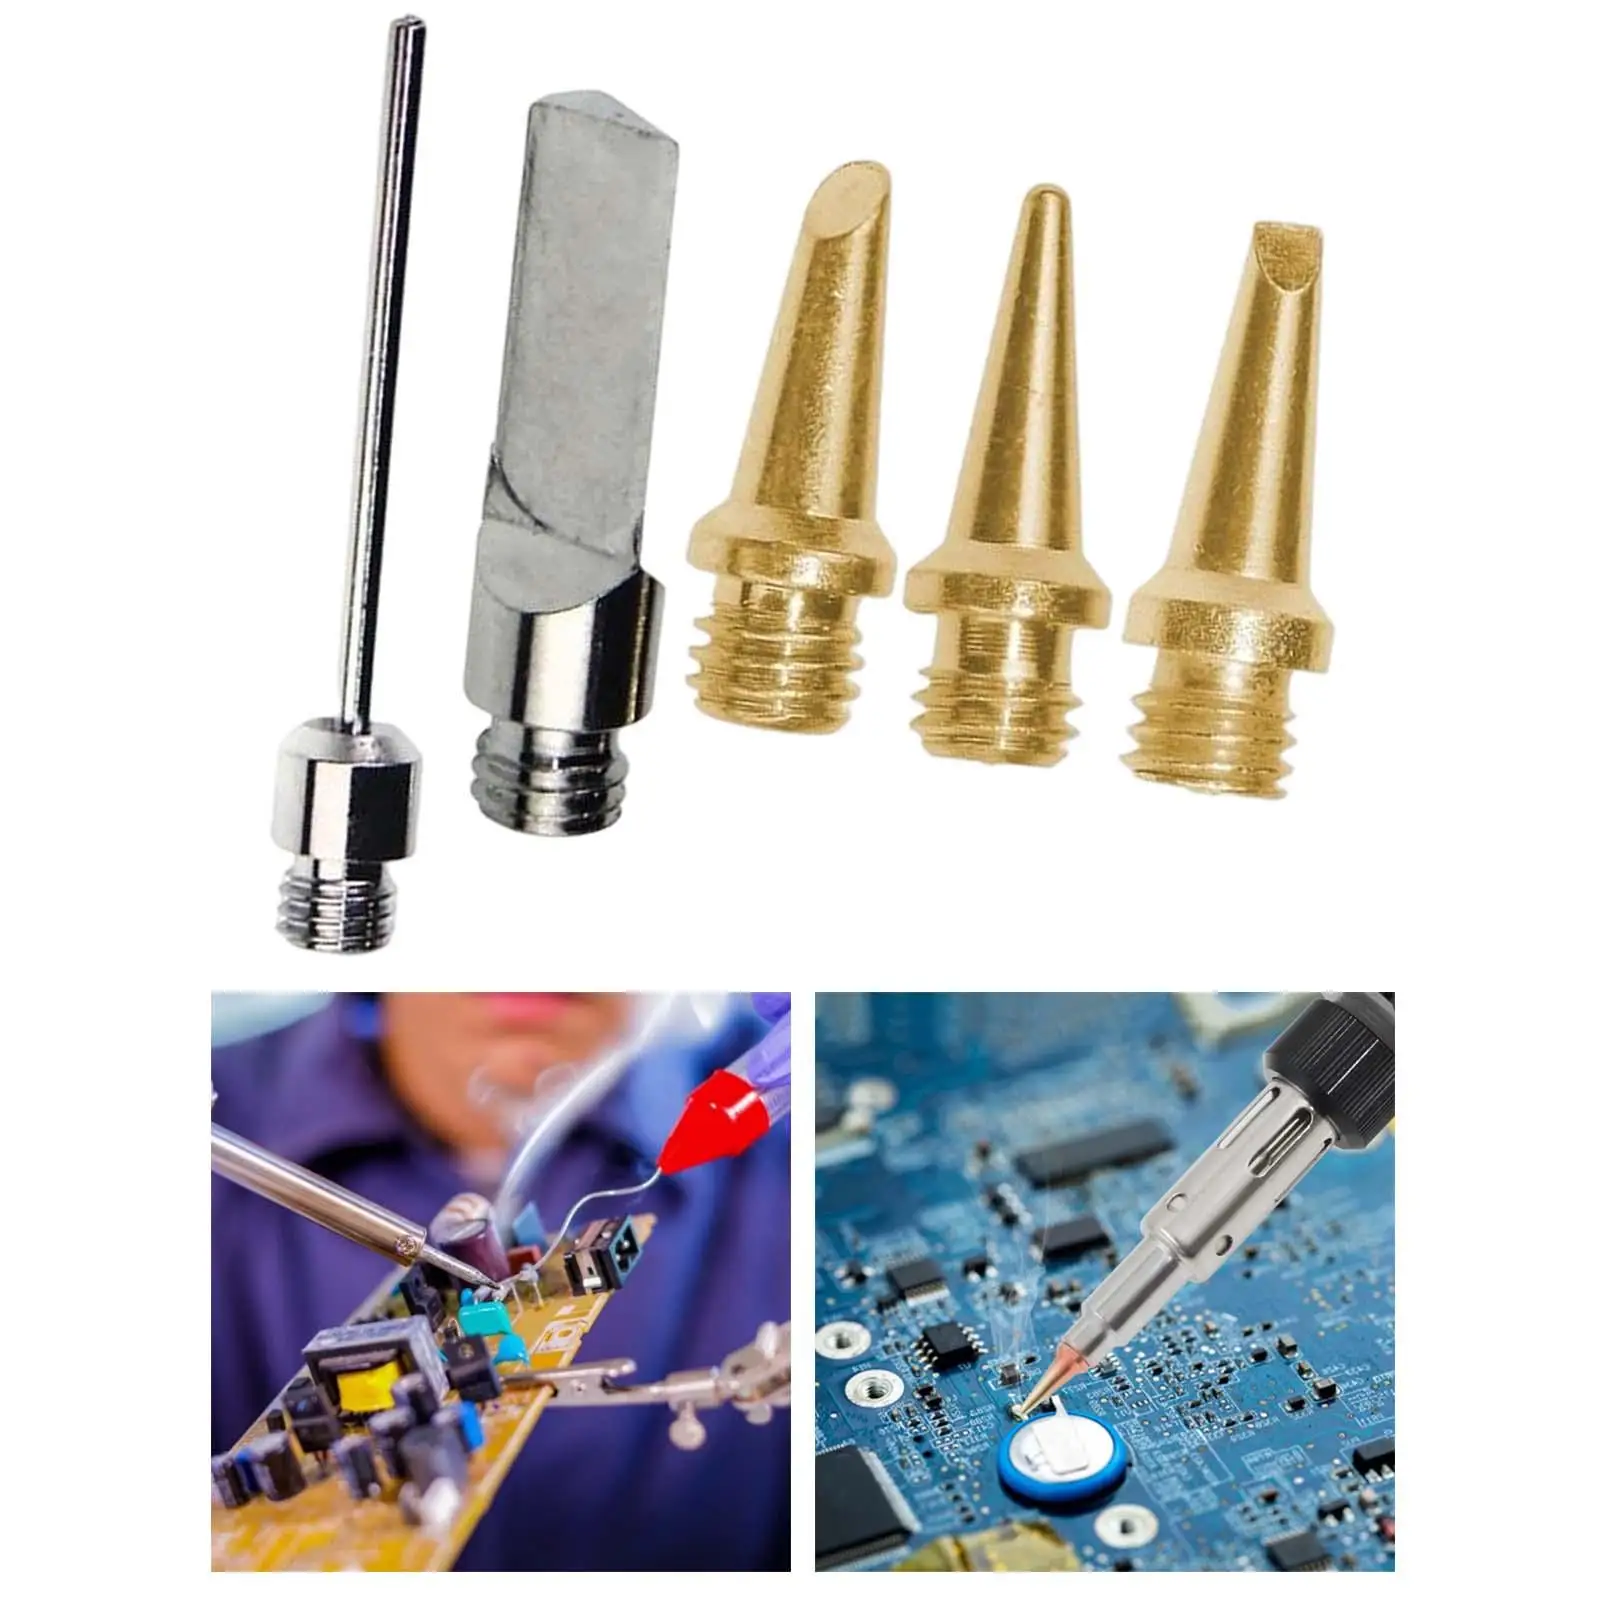 5 Pieces Metal Gas Soldering Iron Welding Torch Kit Replacement Accessories